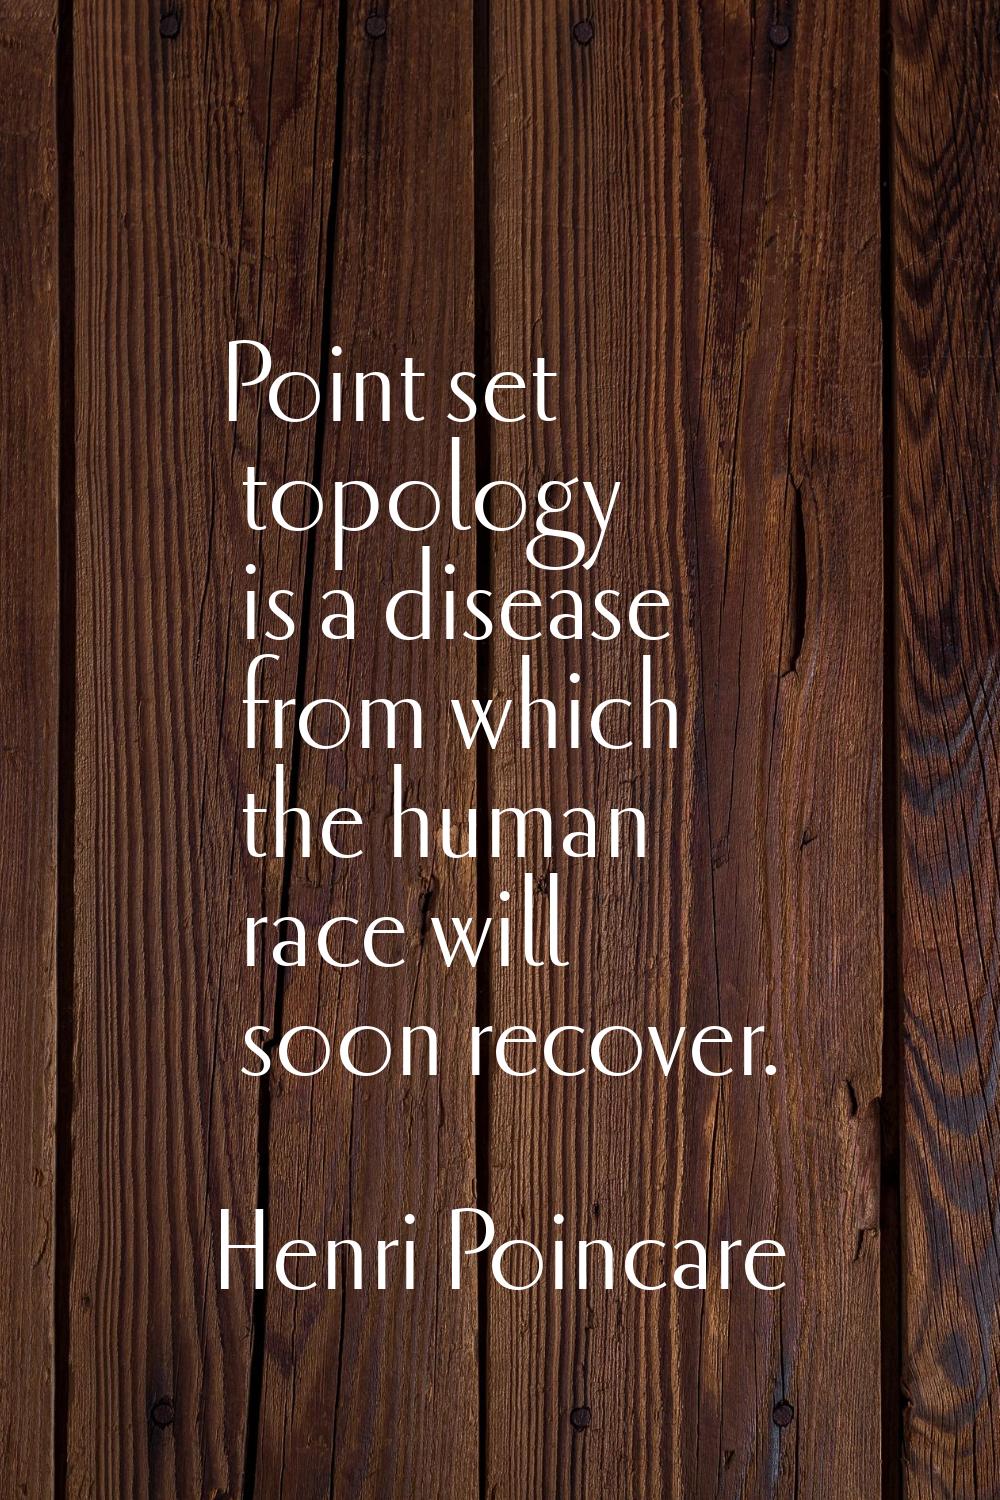 Point set topology is a disease from which the human race will soon recover.